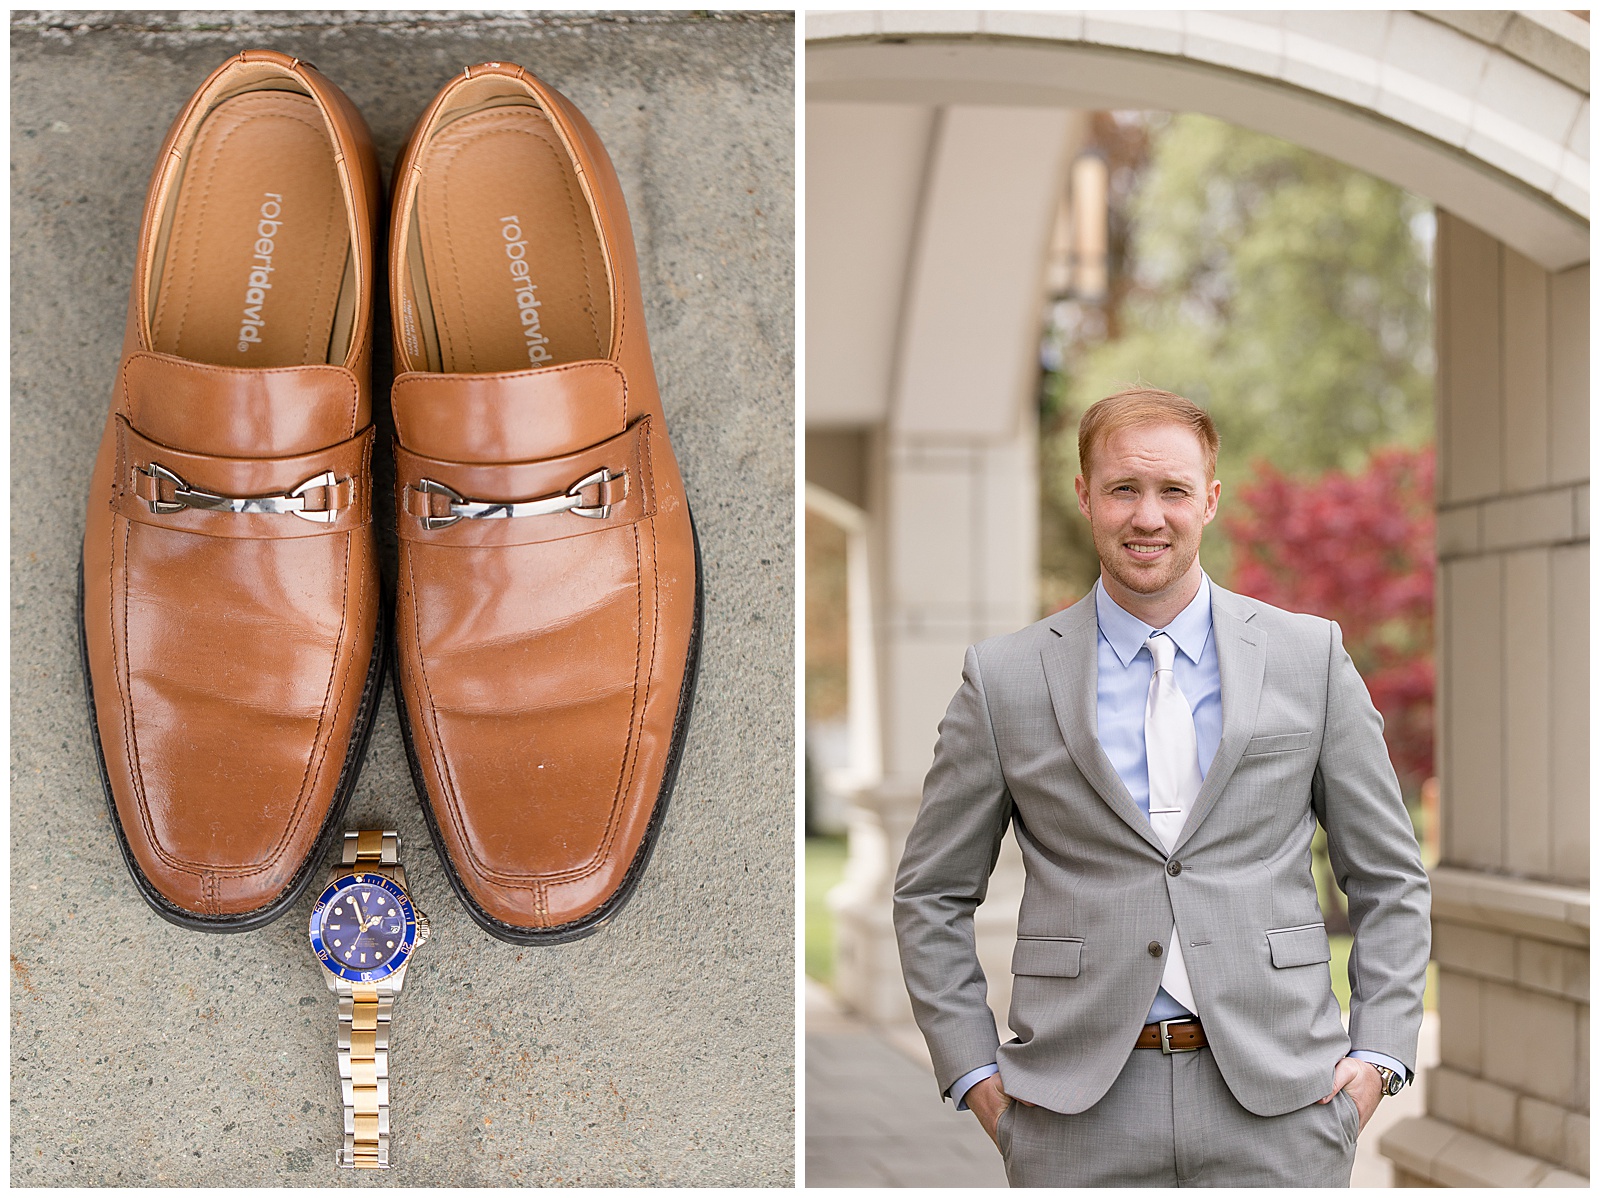 groom's dress shoes and watch on display as he smiles for camera before spring wedding day